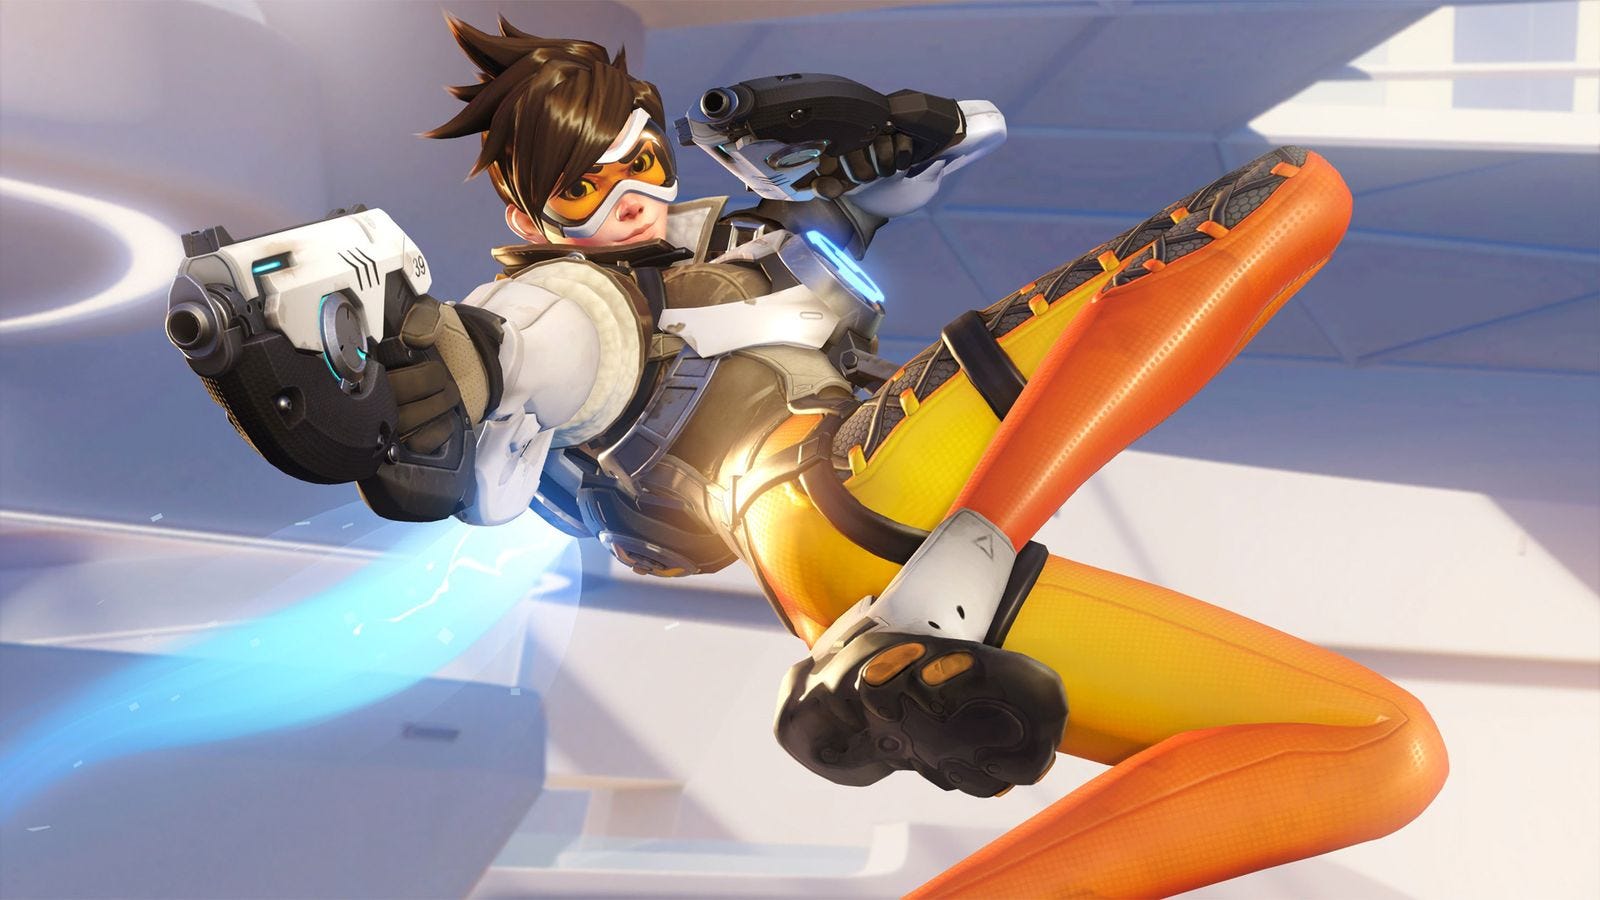 Overwatch beats League of Legends as top esports title at The Game Awards  2016 | by Nicole Carpenter | Medium